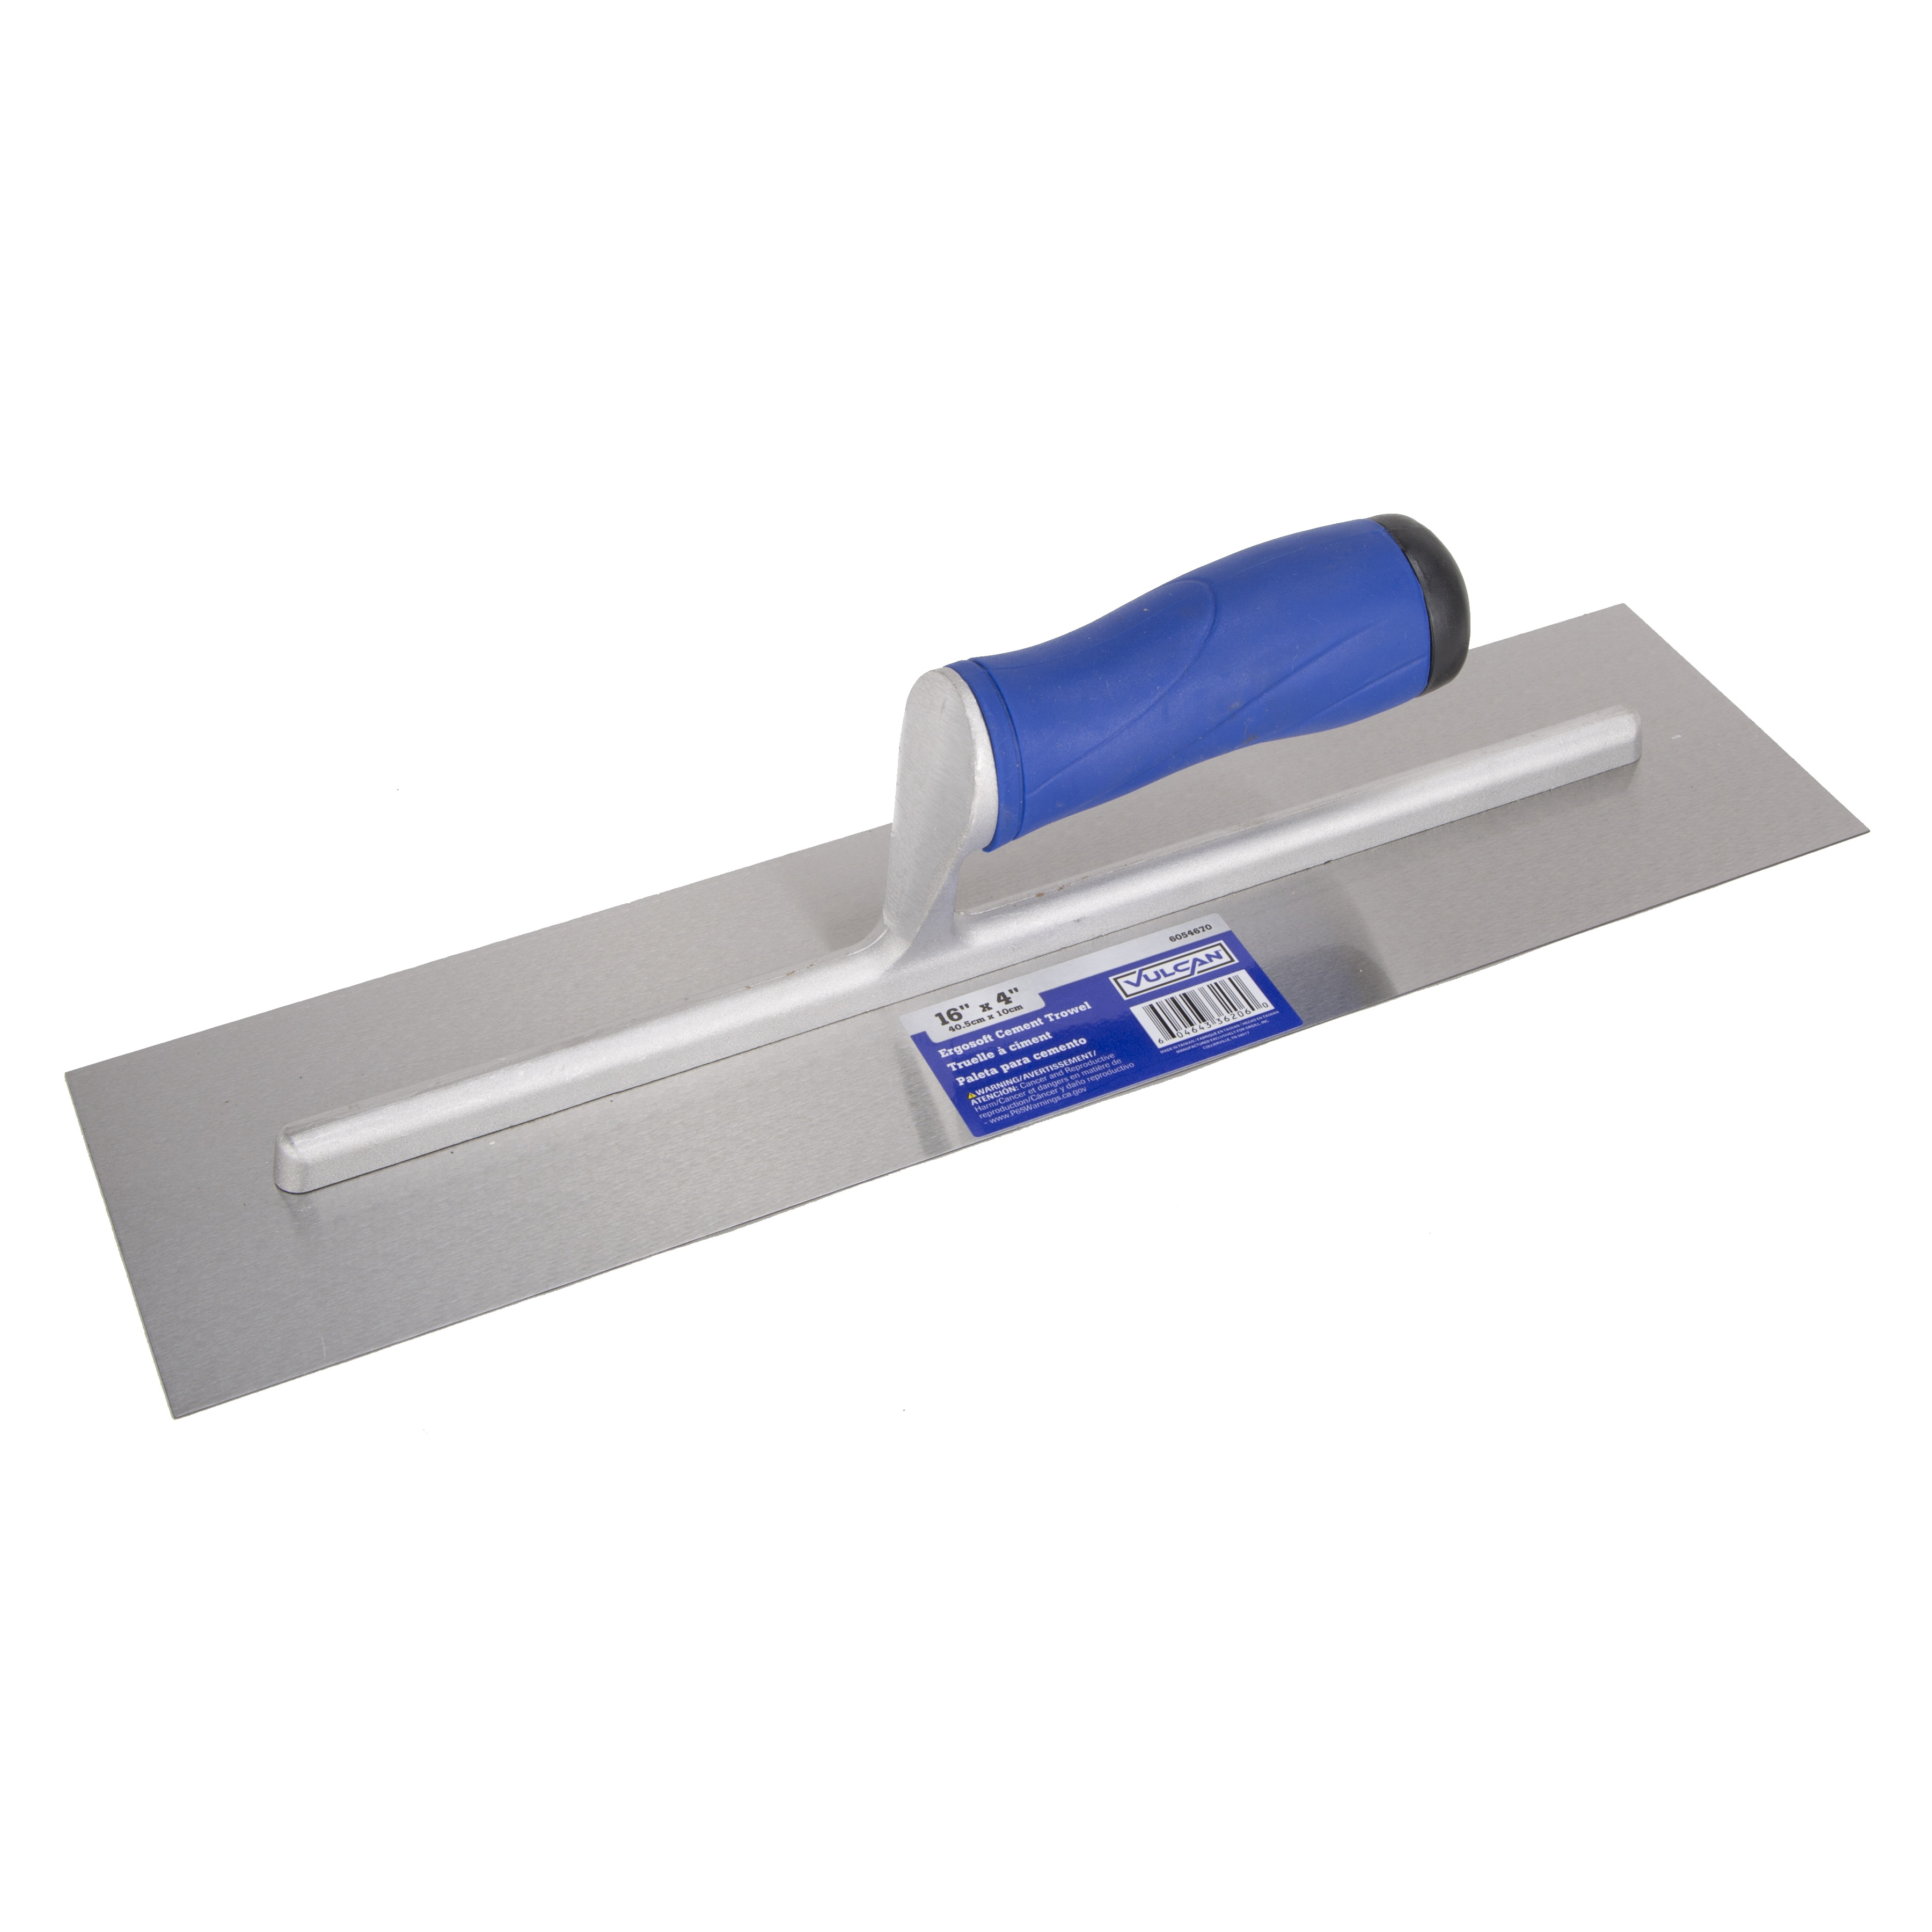 36206 Cement Trowel, 16 in L Blade, 4 in W Blade, Right Angle End, Ergonomic Handle, Plastic Handle